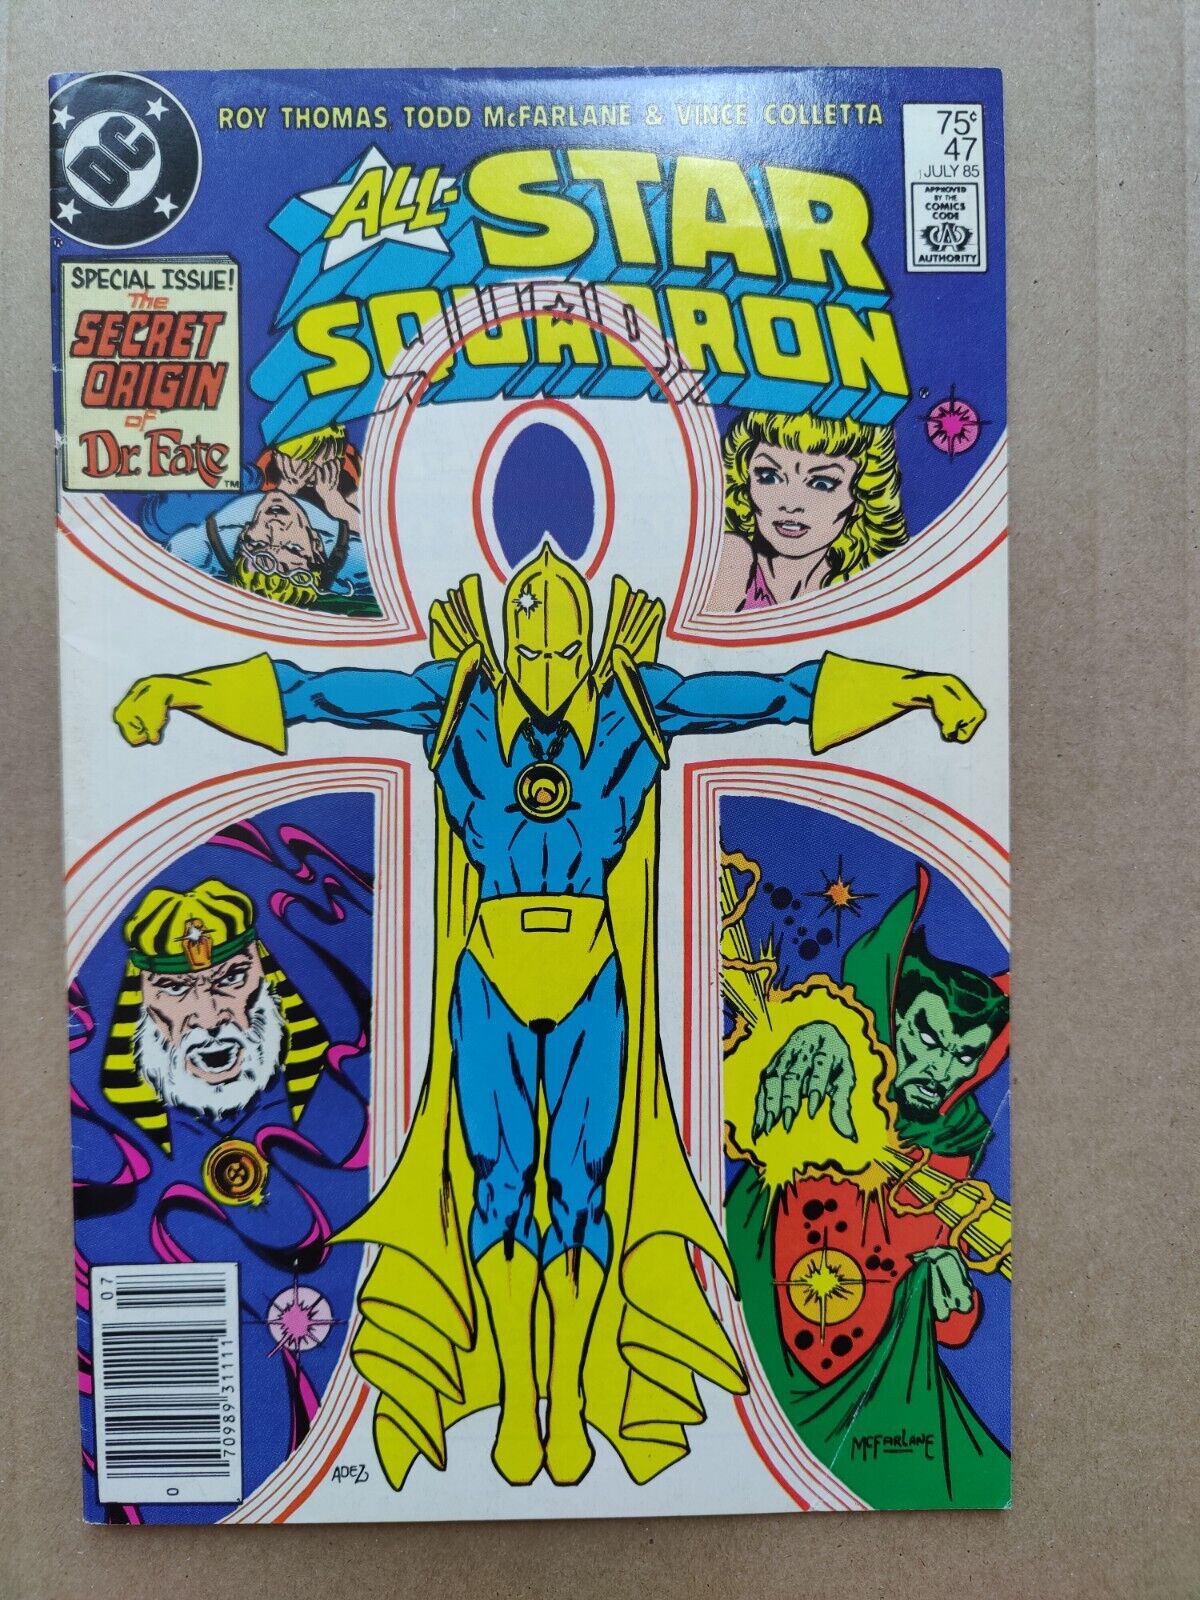 ALL STAR SQUADRON #47 Dr Fate Early Todd McFarlane Art 1985 Midgrade (2)